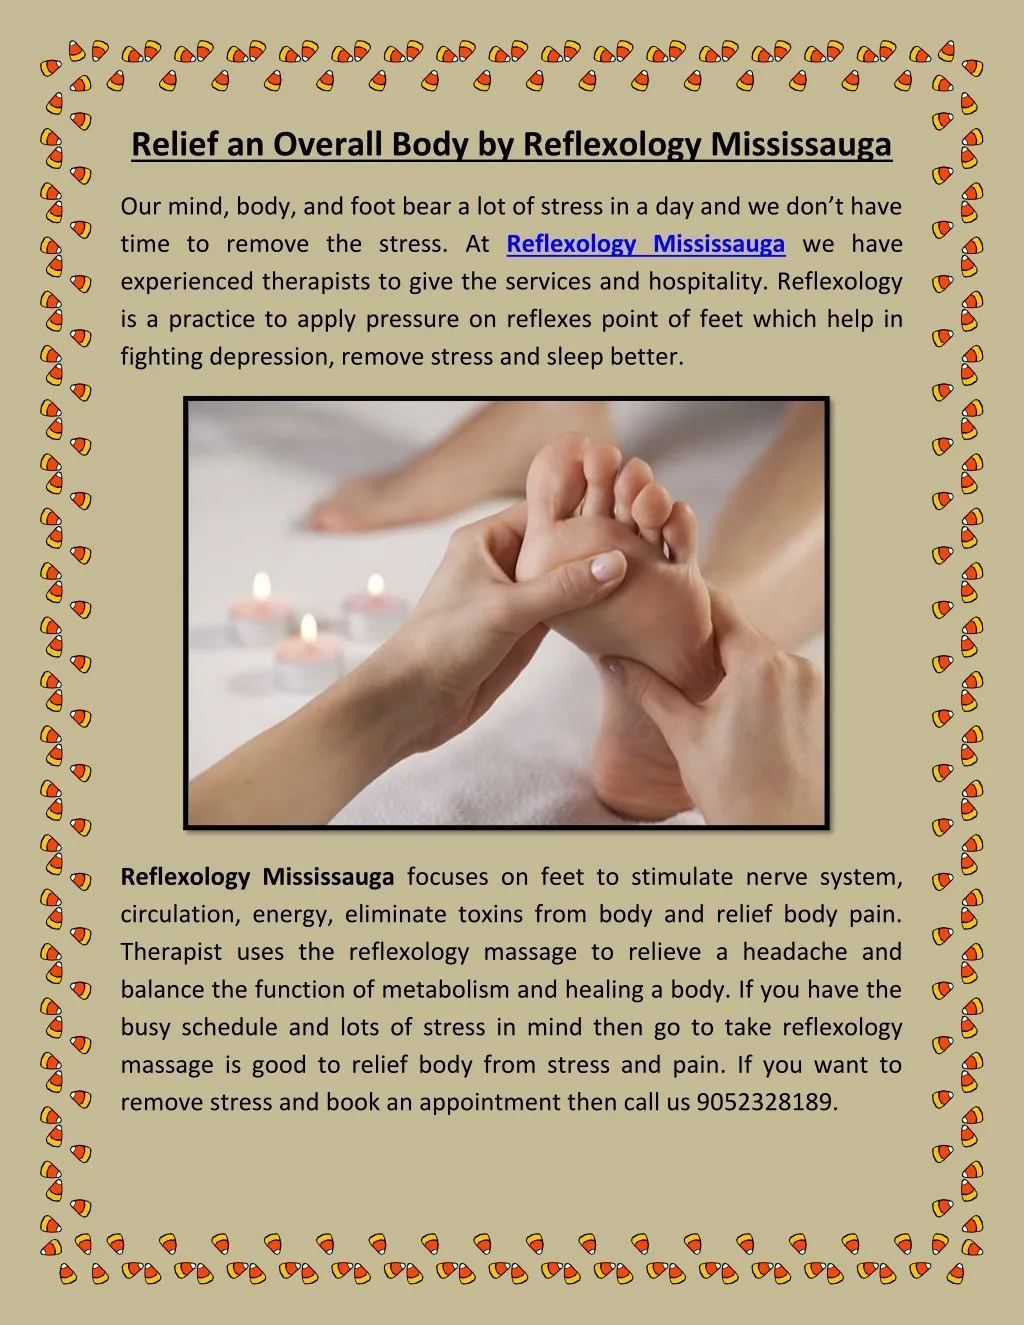 relief an overall body by reflexology mississauga